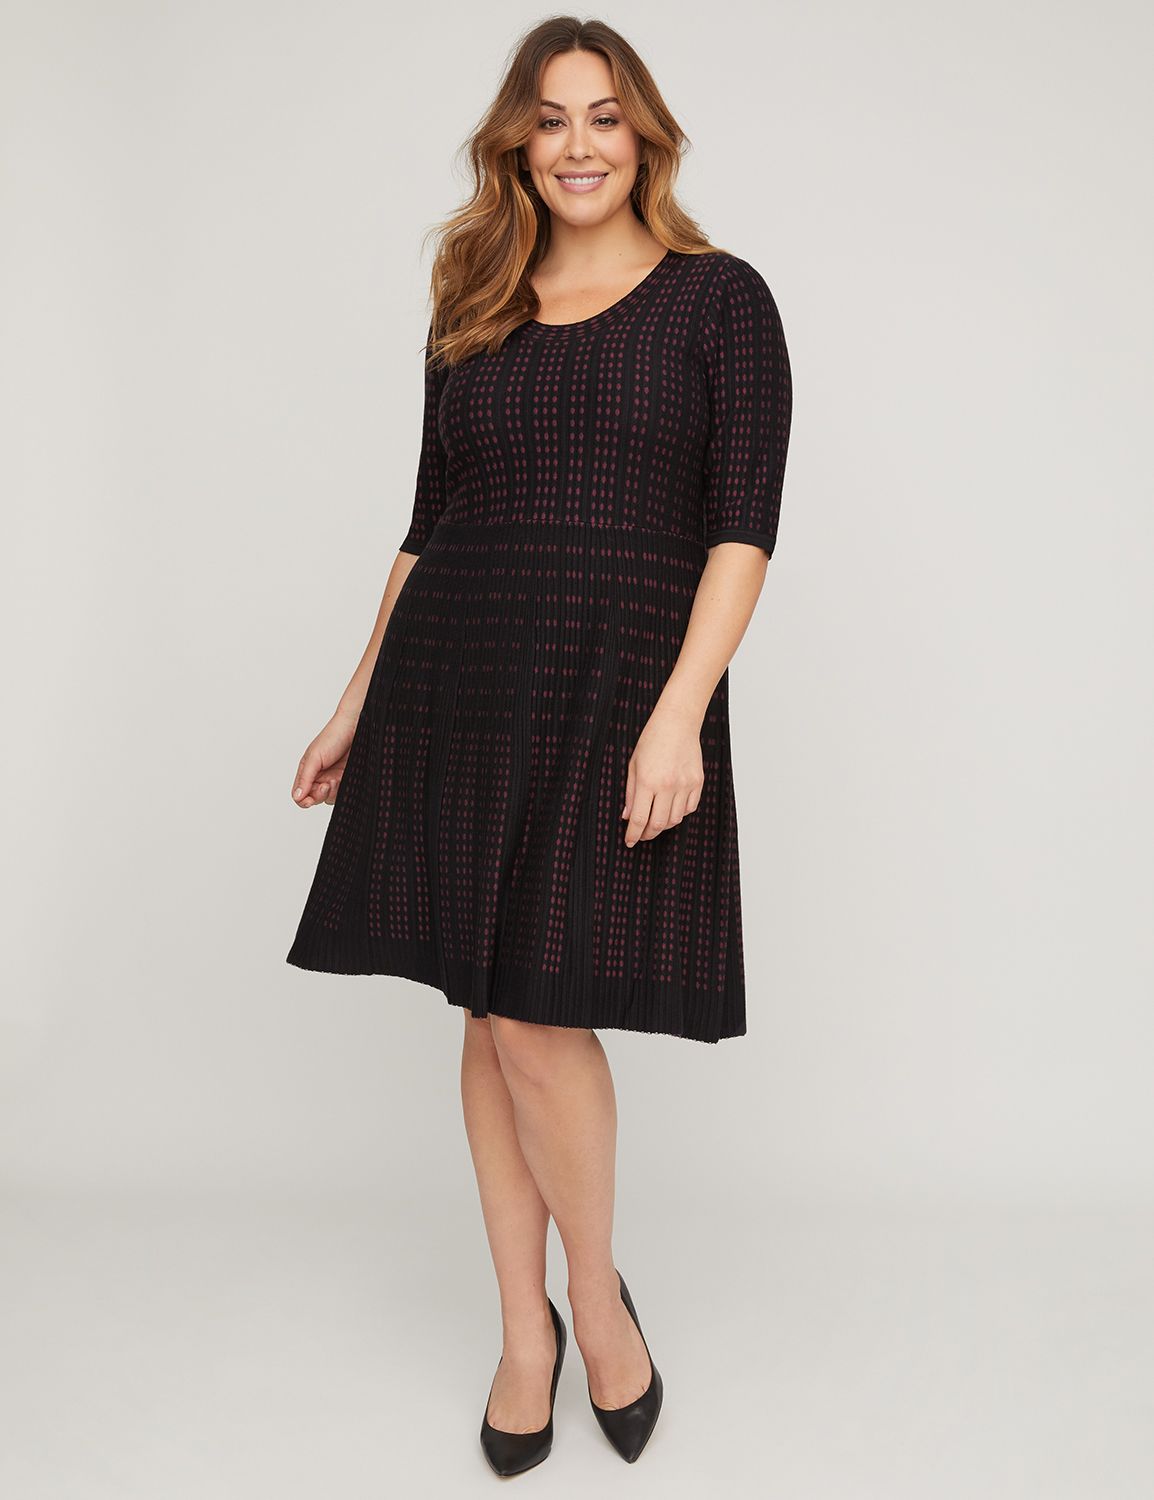 Plus Size Dresses & Gowns For Women | Catherines